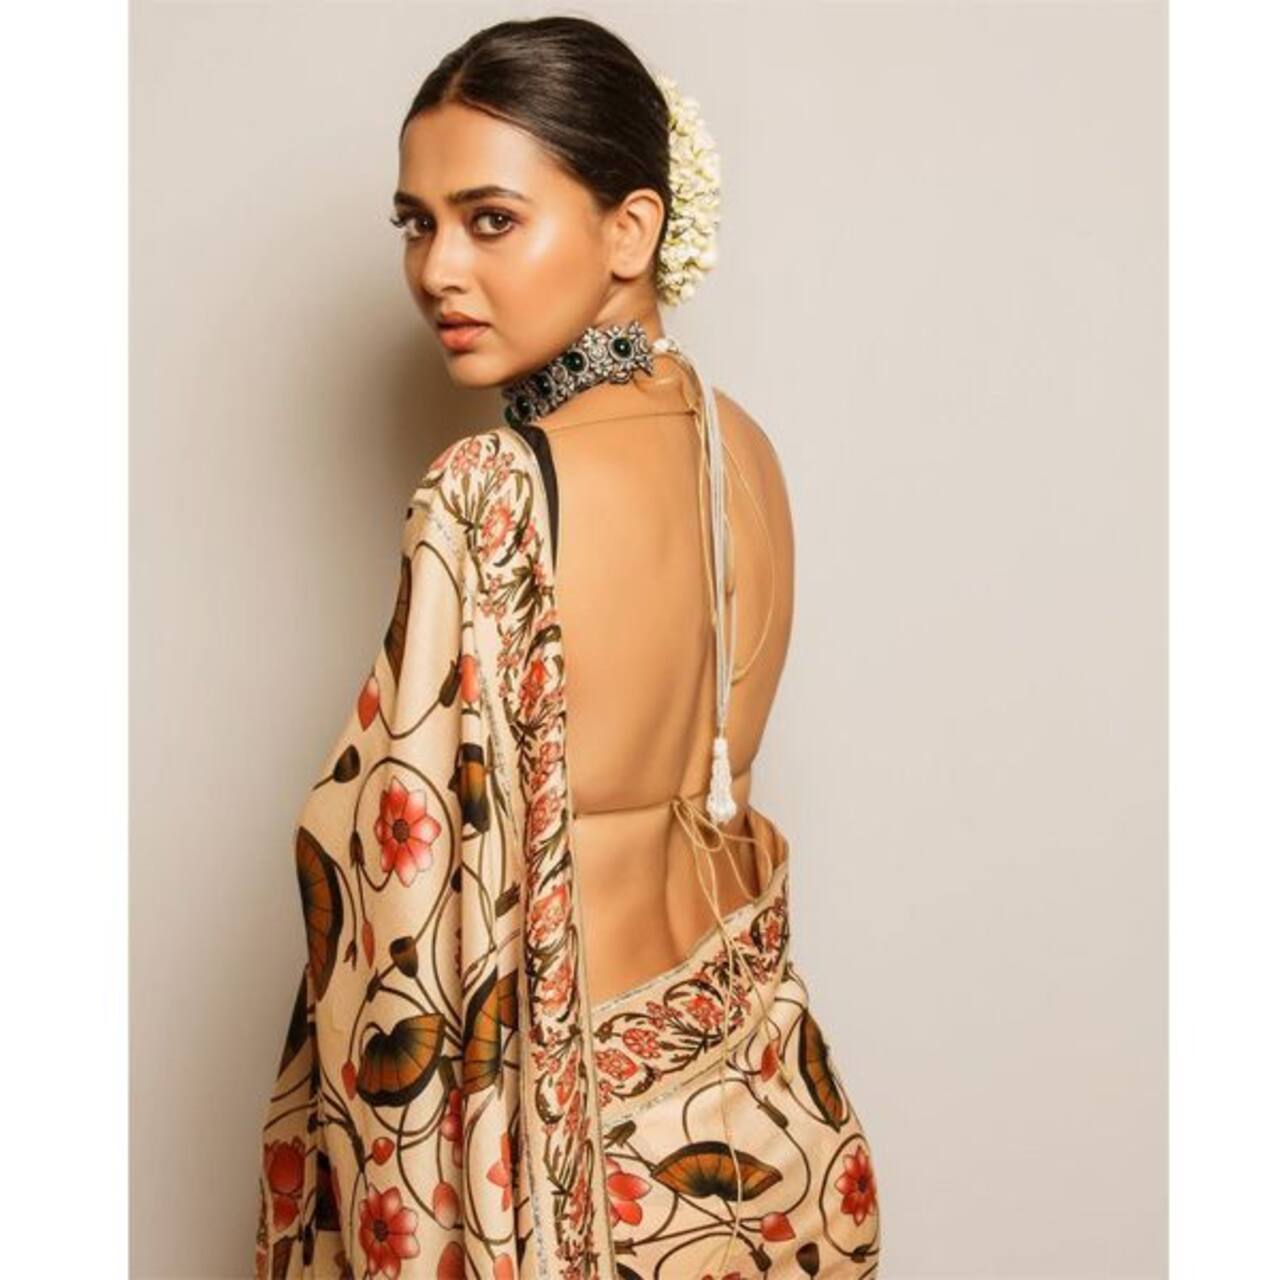 Naagin 6 star Tejasswi Prakash raises the oomph factor in a stunting  backless blouse and saree; fans say, 'Yeh ladki fire hai' [View Pics]